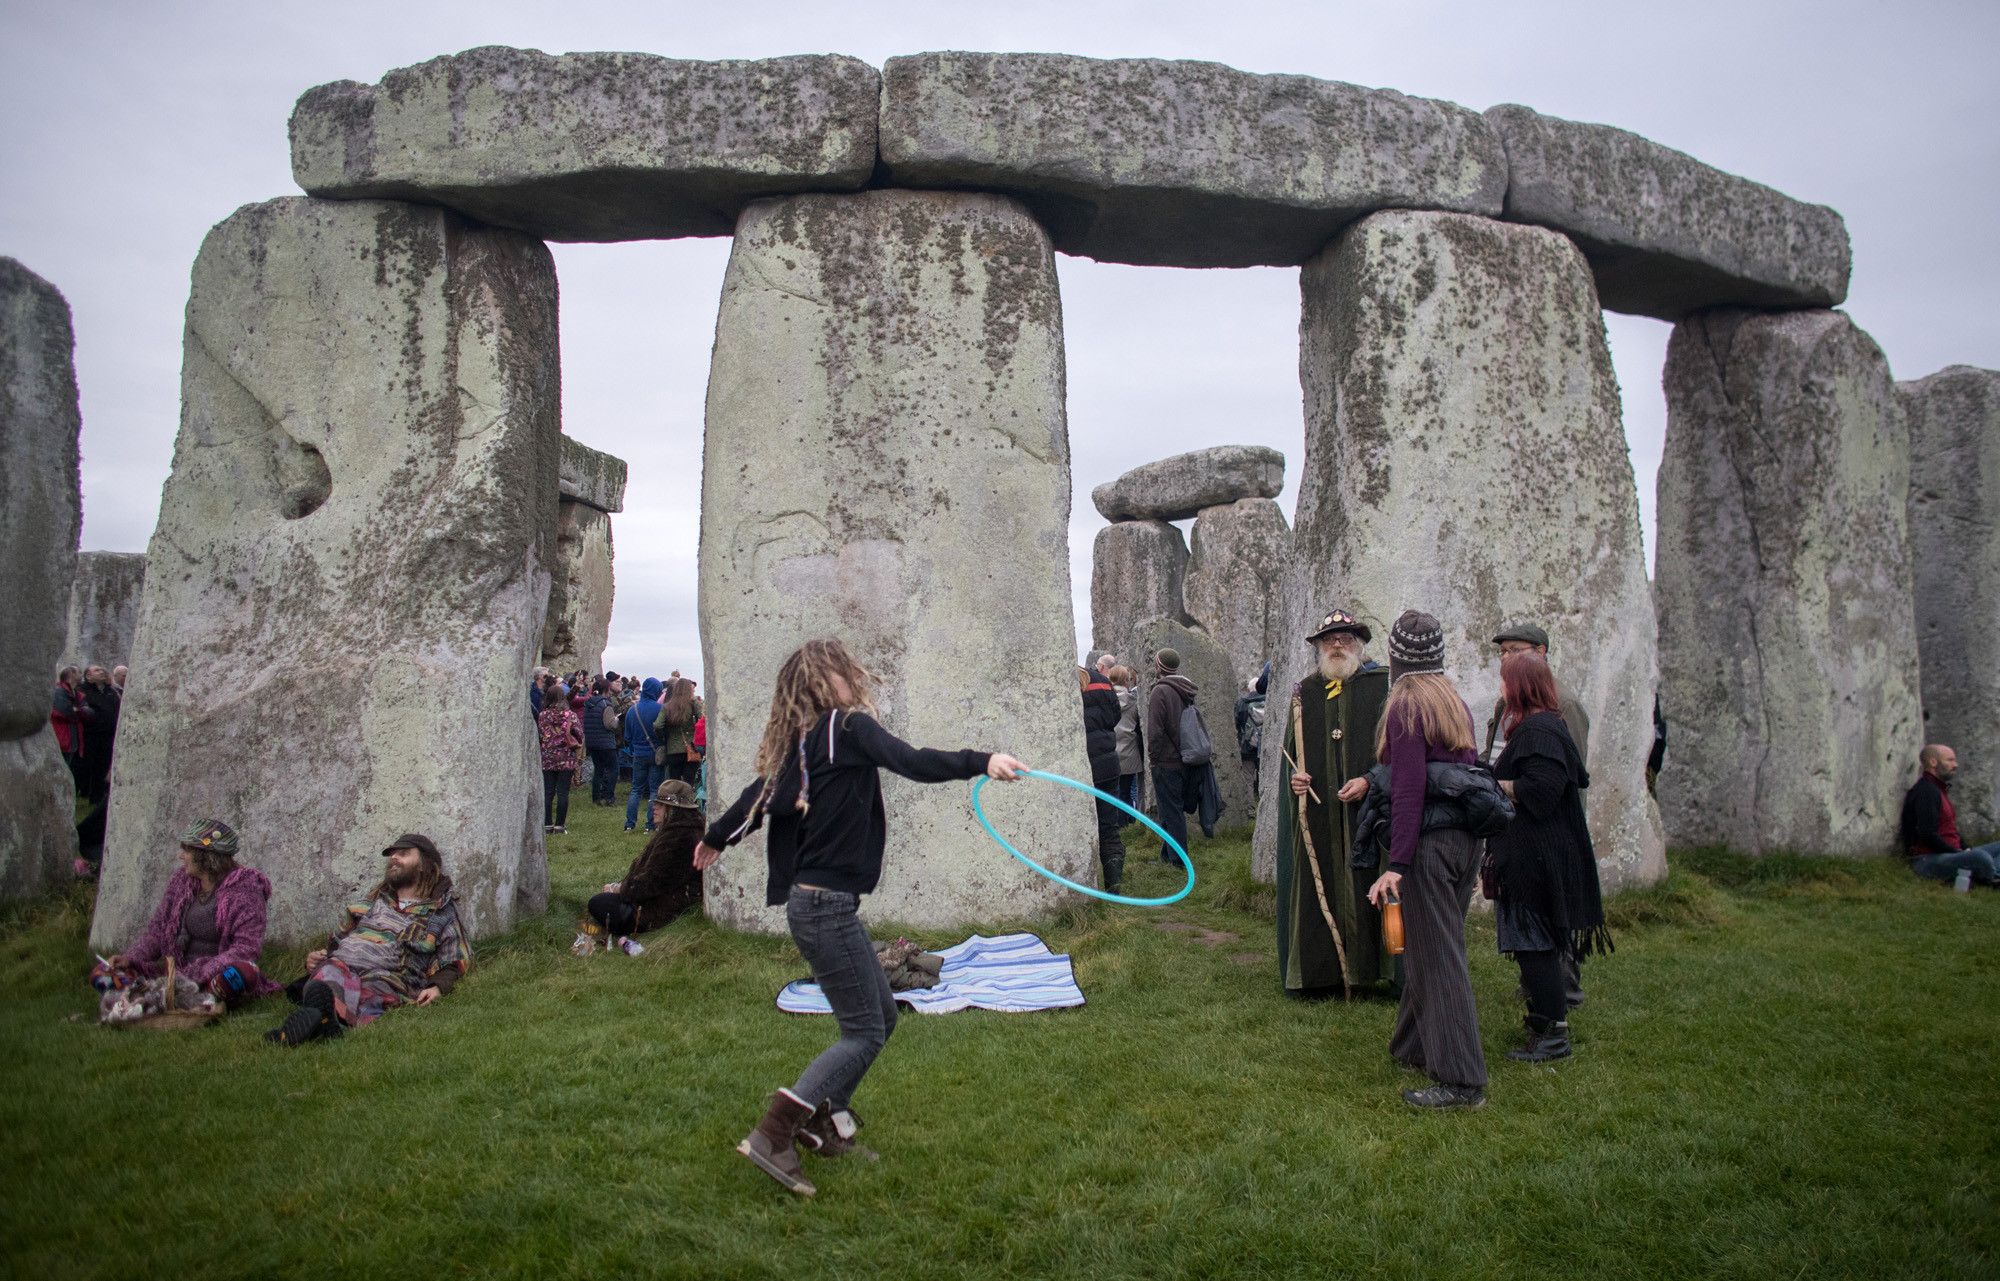 Stonehenge is a monument to penises, archaeologist claims